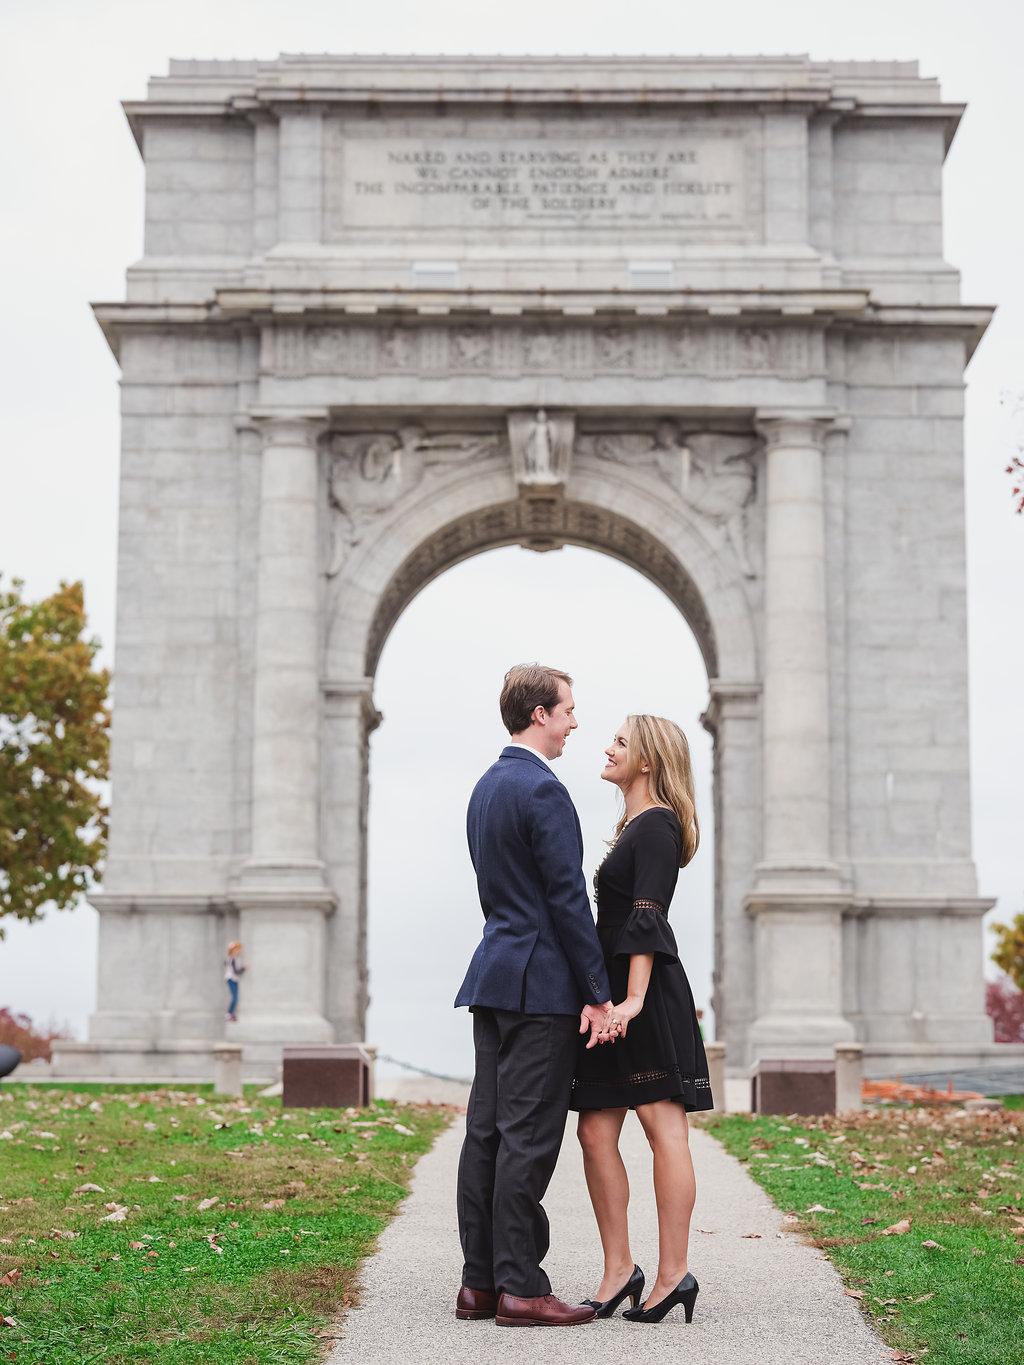 Fall Engagement Session at Valley Forge National Historical Park Alison Conklin Photography Philly In Love Philadelphia Weddings Venues Vendors